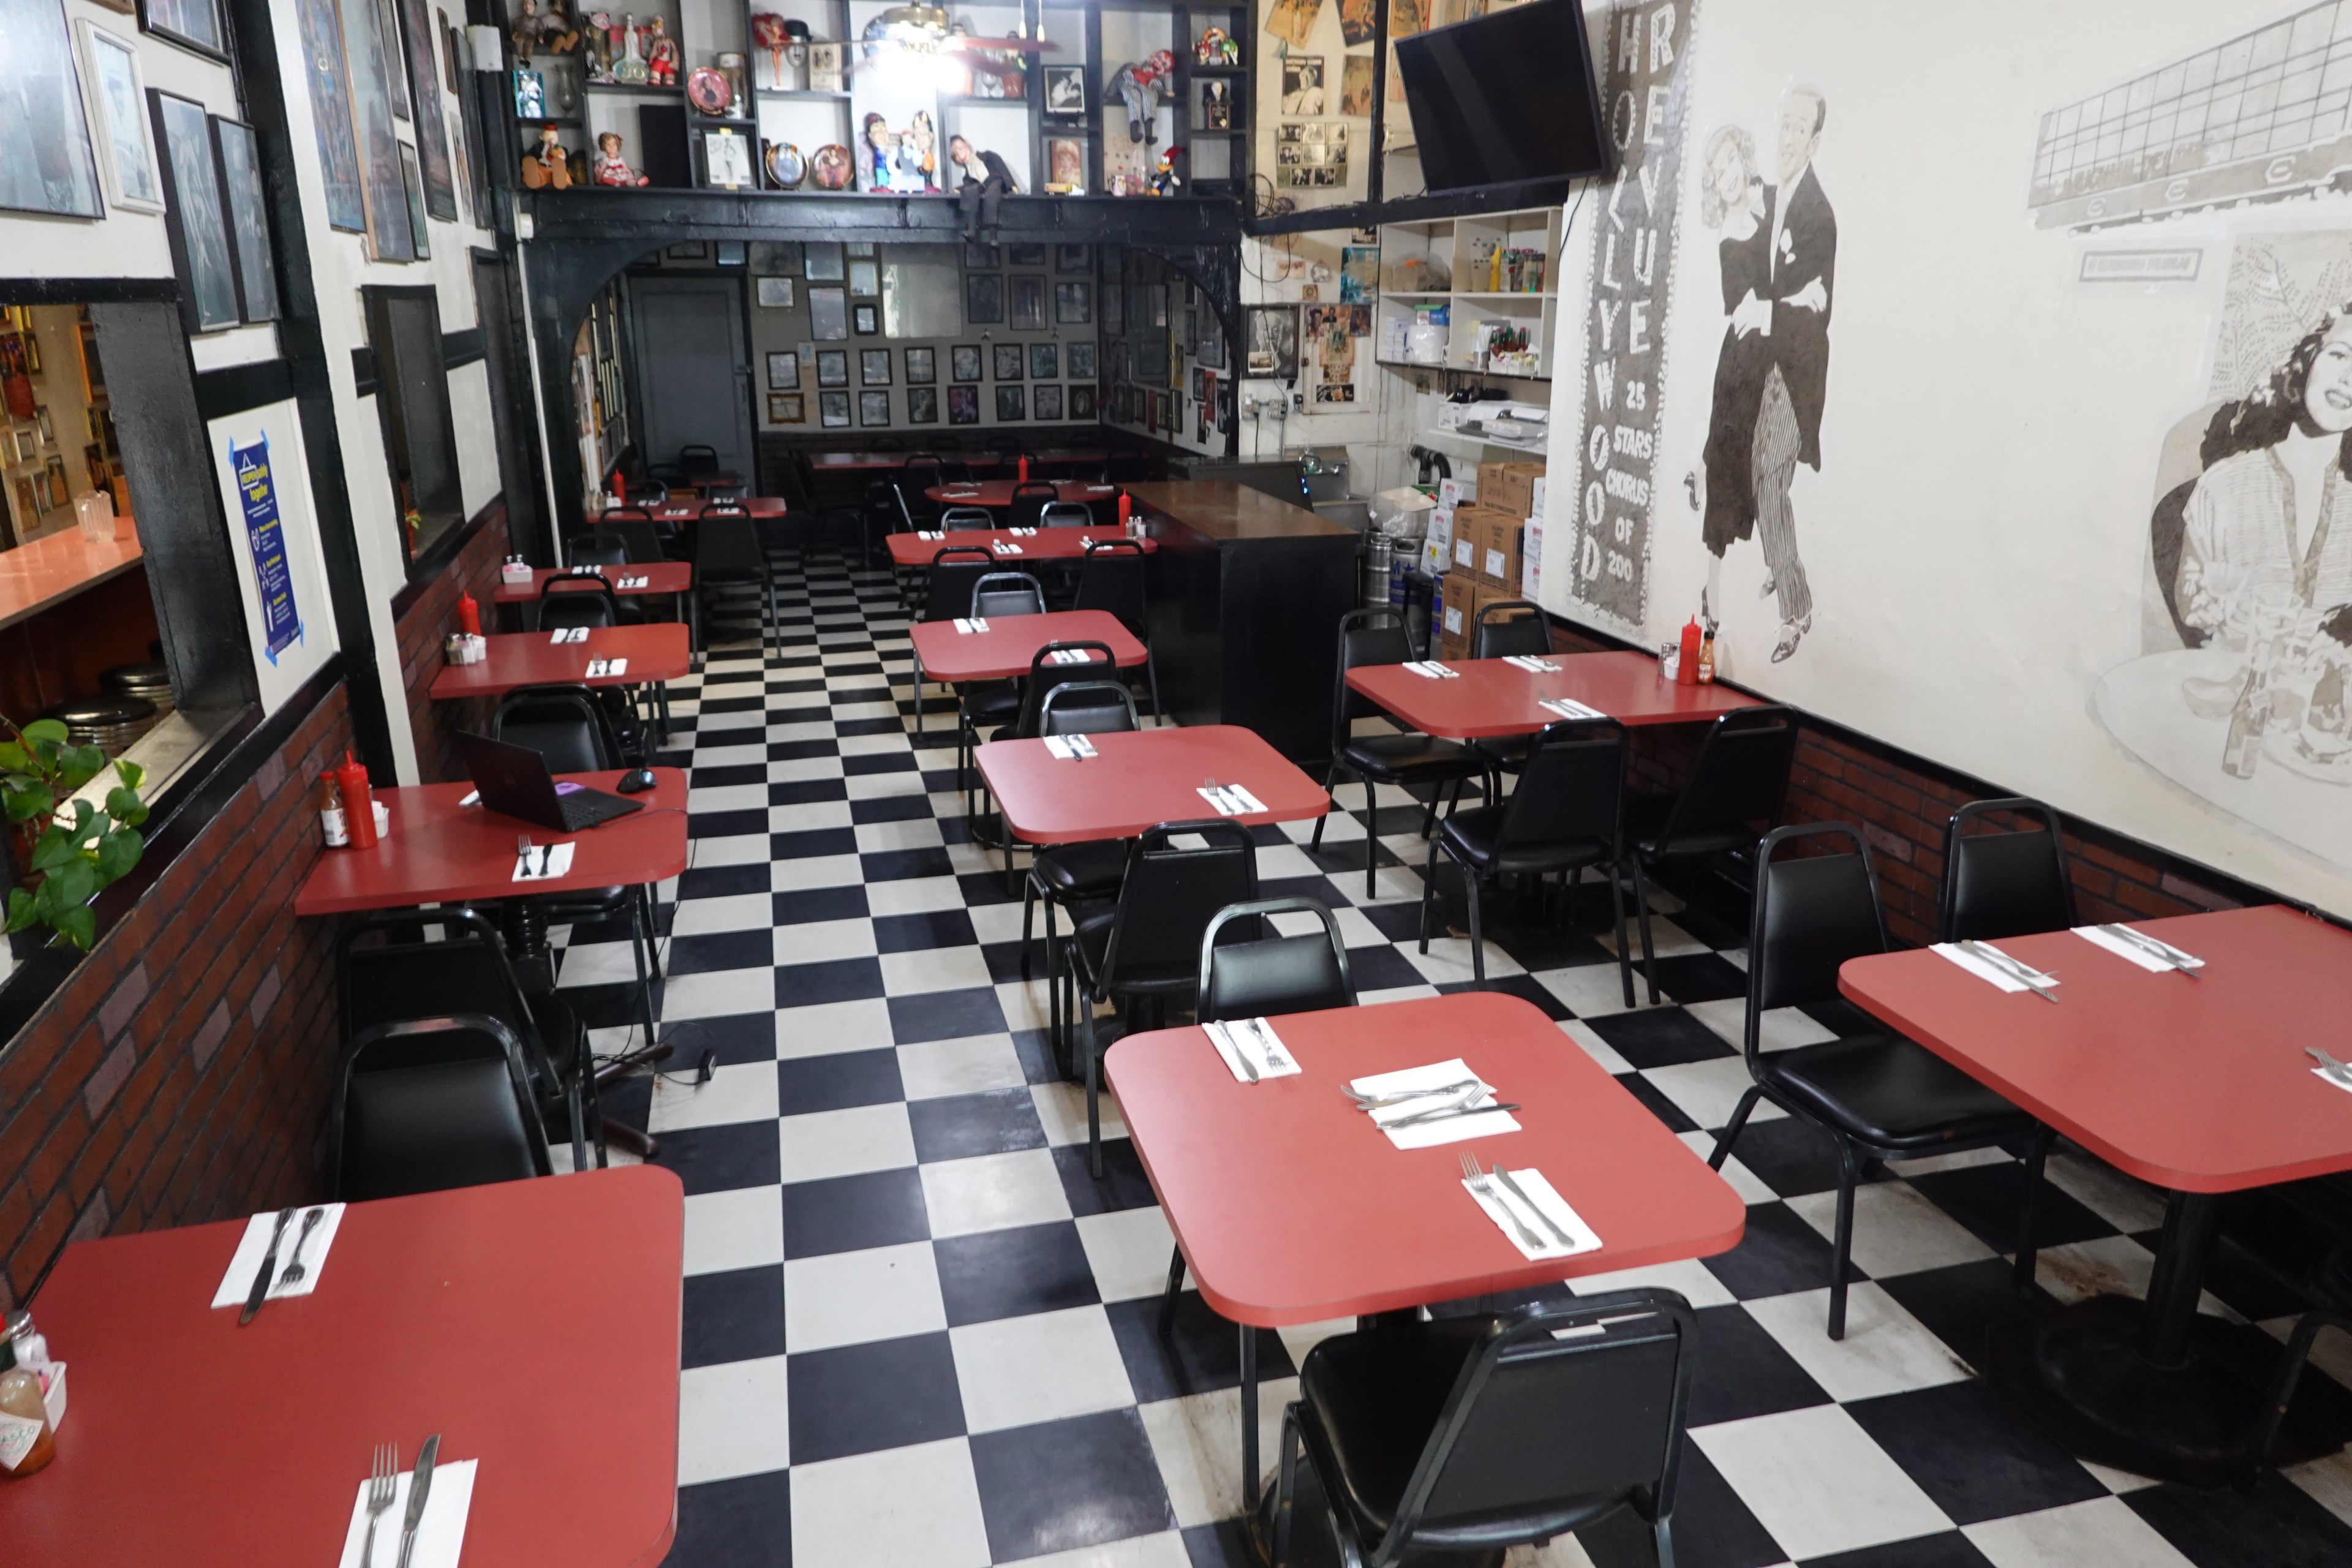 A retro diner with checkered floors, red tables, and nostalgic wall decor.